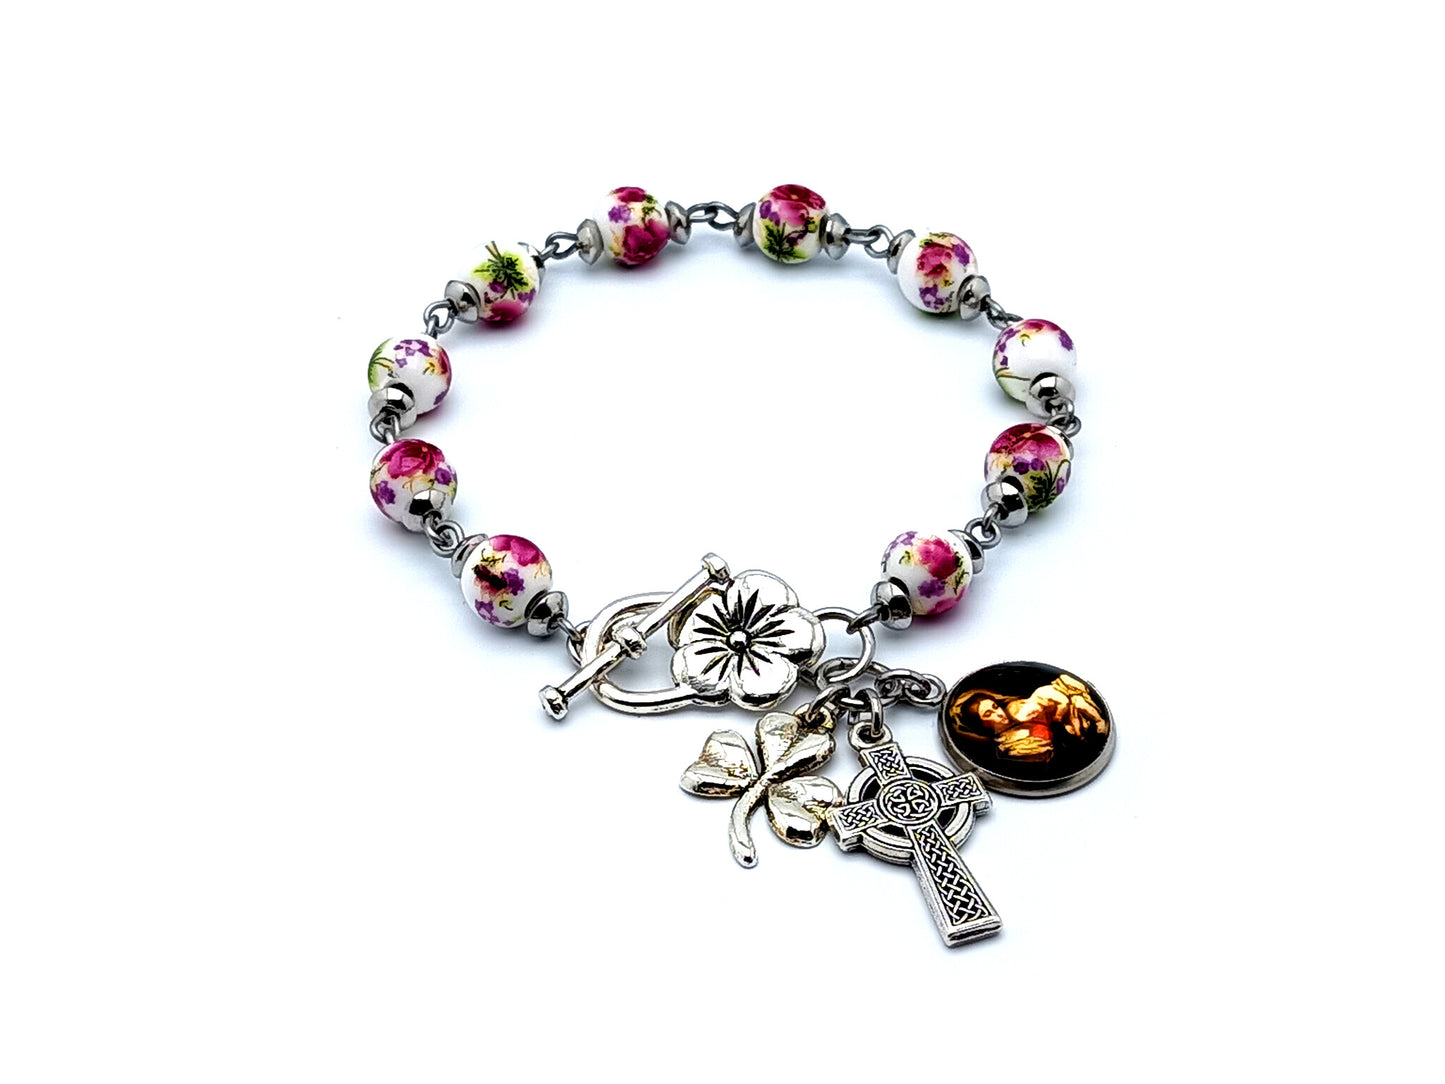 Our Lady of Divine Providence unique rosary beads single decade rosary bracelet with porcelain beads and Celtic cross and Holy Trinity clover leaf medal.